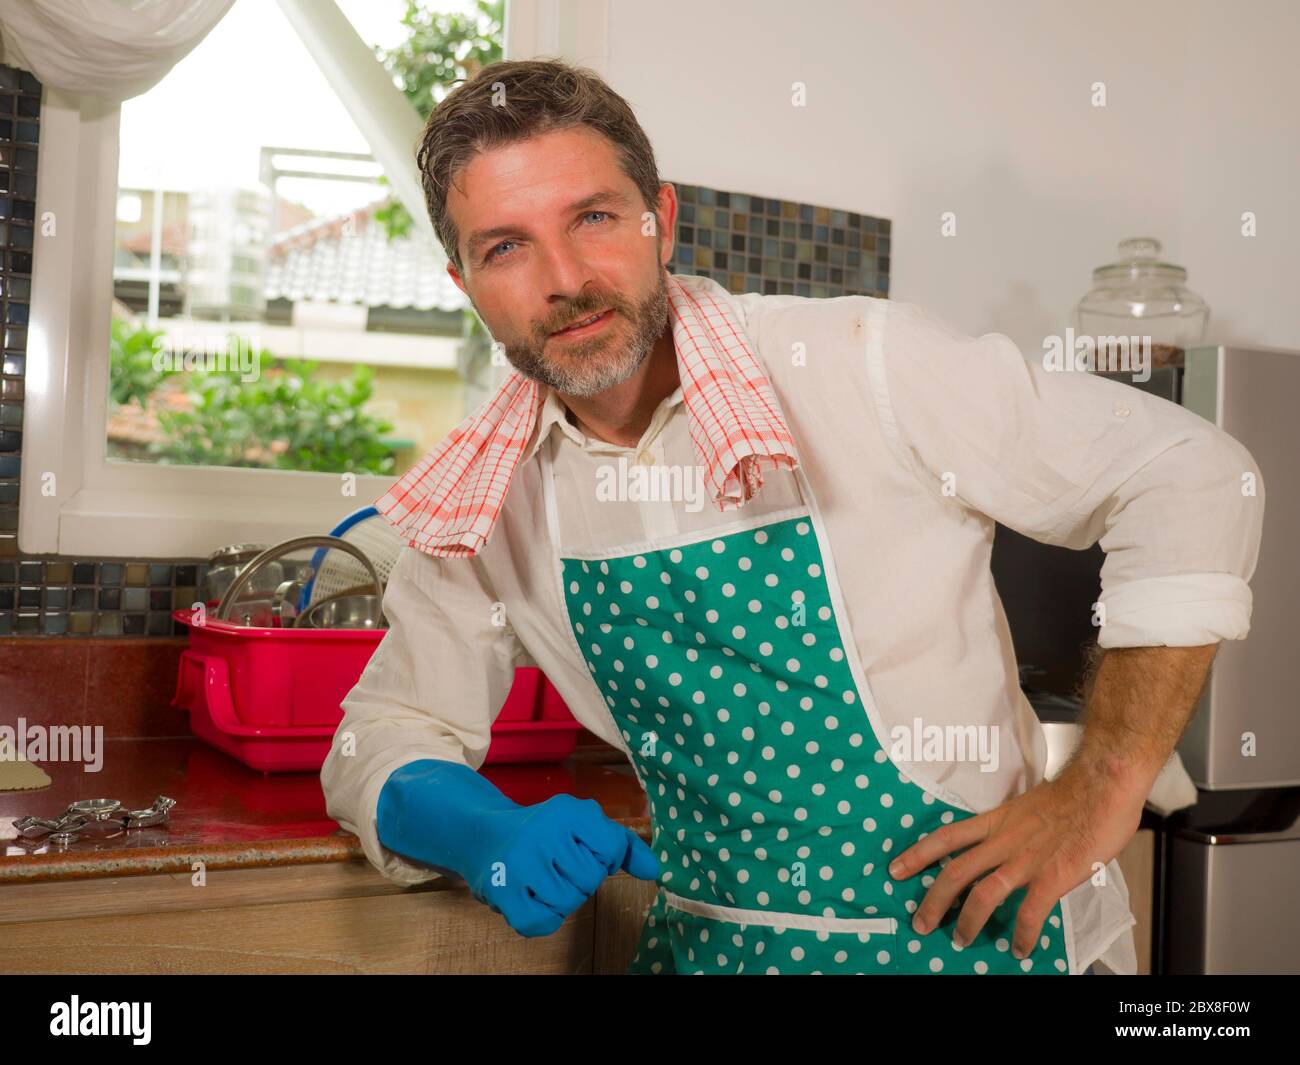 Portrait of smiling man cleaning the kitchen worktop at home Stock Photo -  Alamy